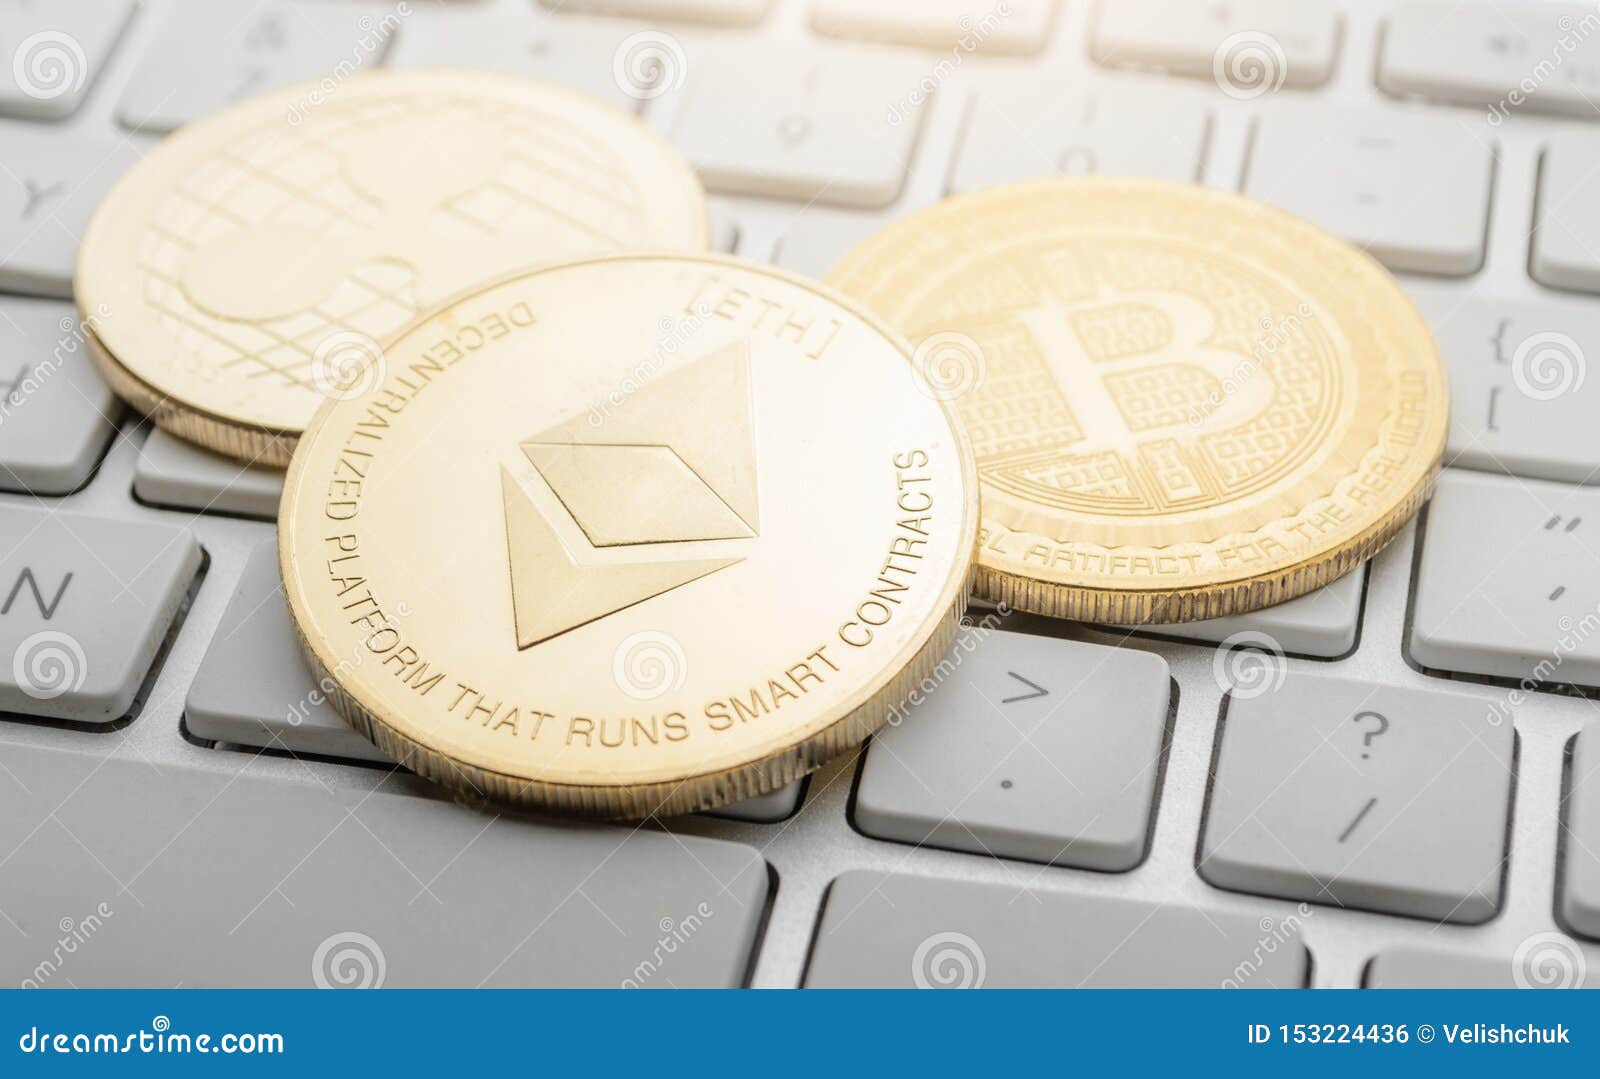 Ripple, Bitcoin, Ethereum On The Keyboard Stock Photo - Image of commerce, coins: 153224436